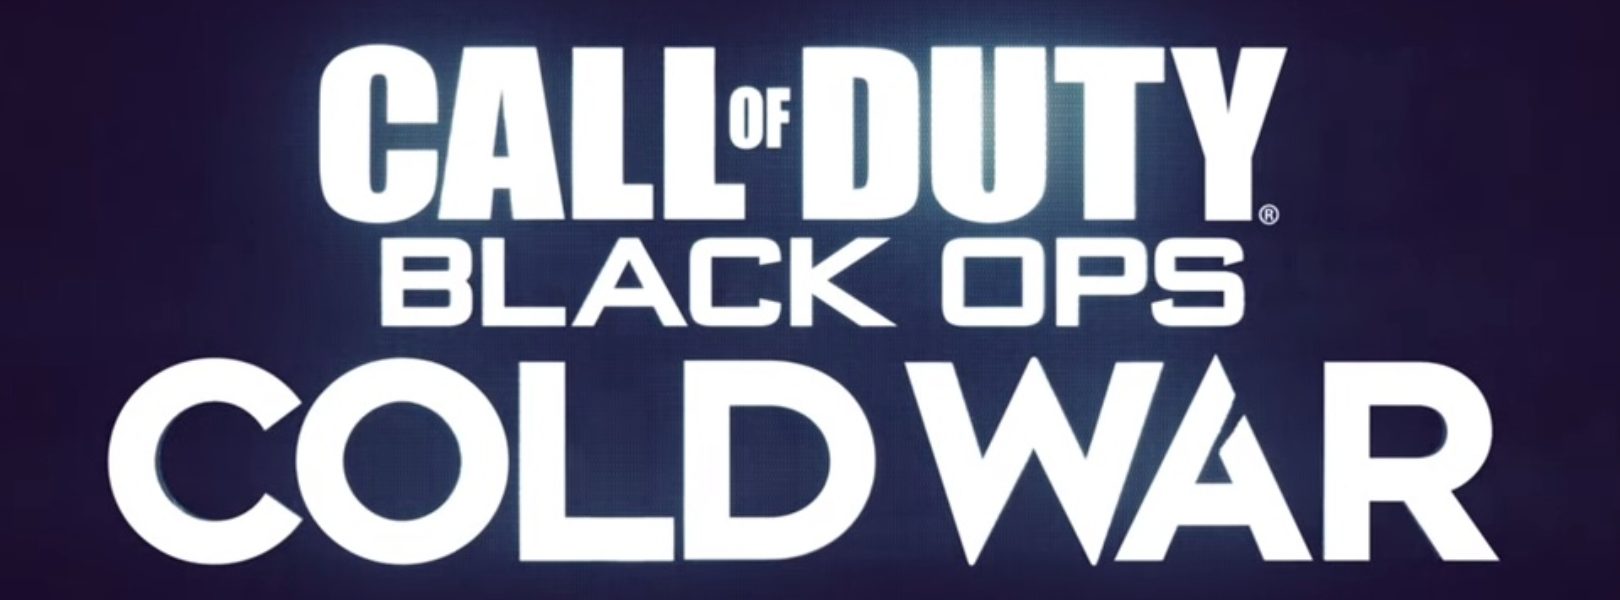 call of duty: black ops cold war beta